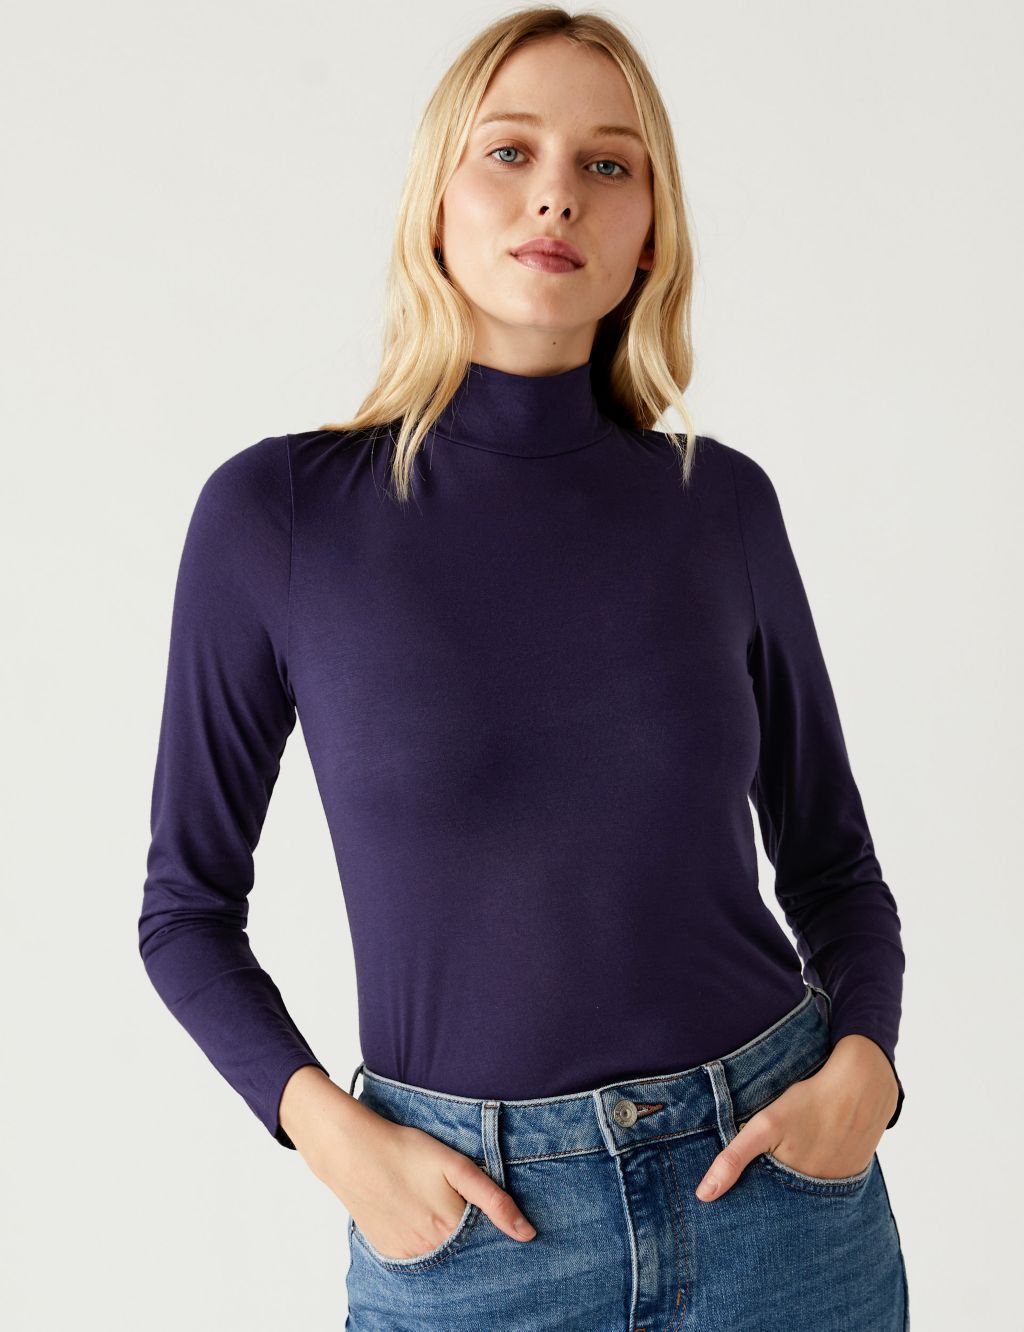 Jersey Roll Neck Relaxed Long Sleeve Top image 1